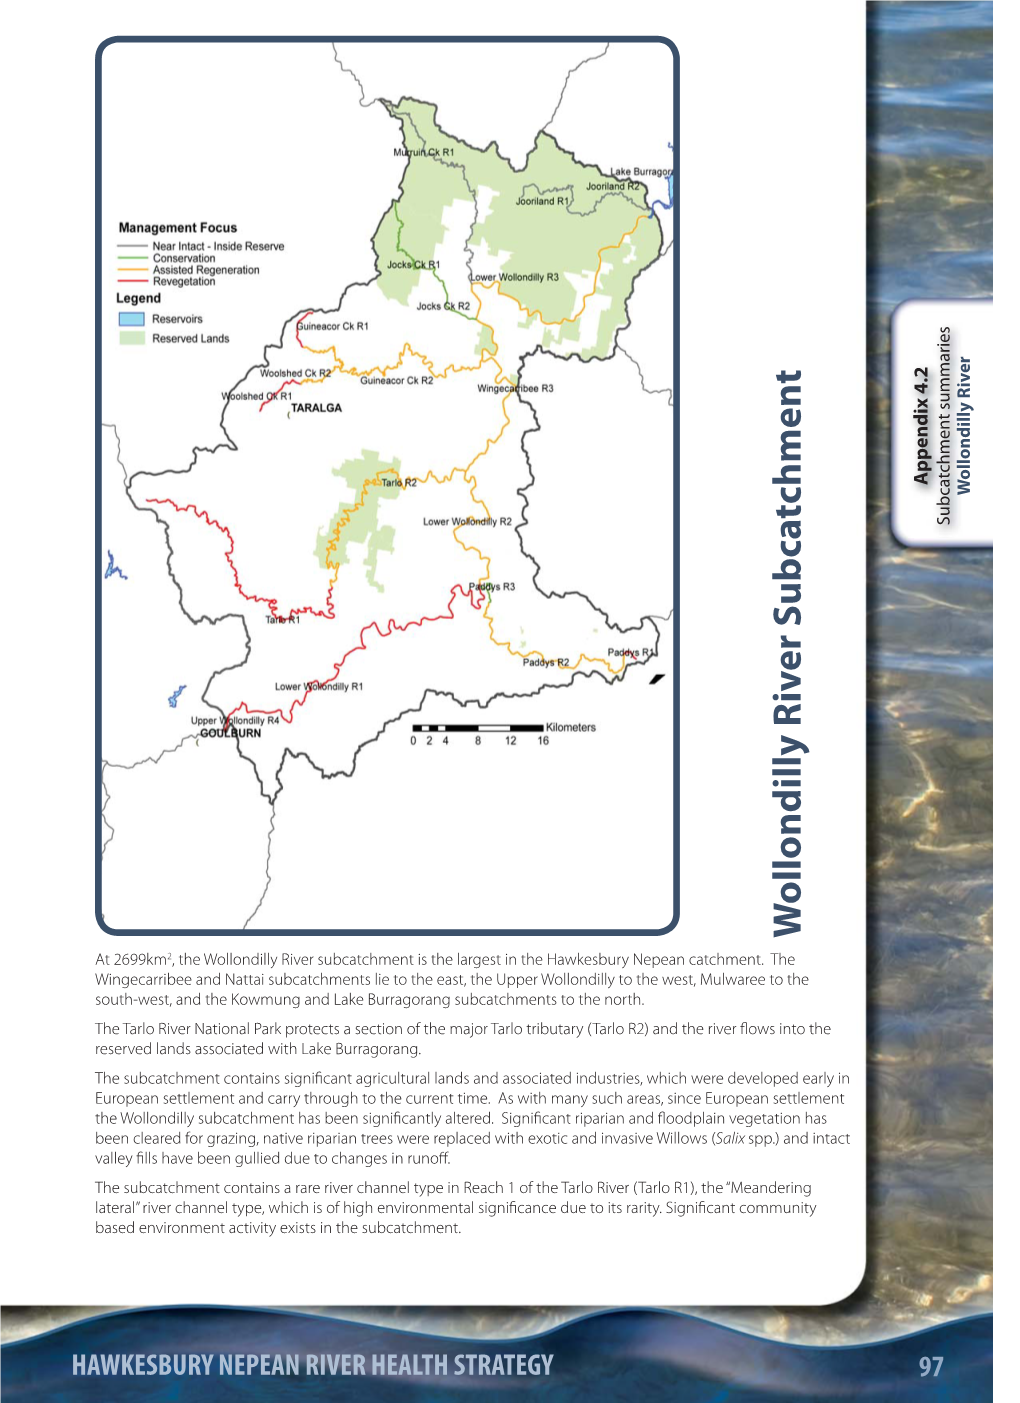 Wollondilly River Subcatchment